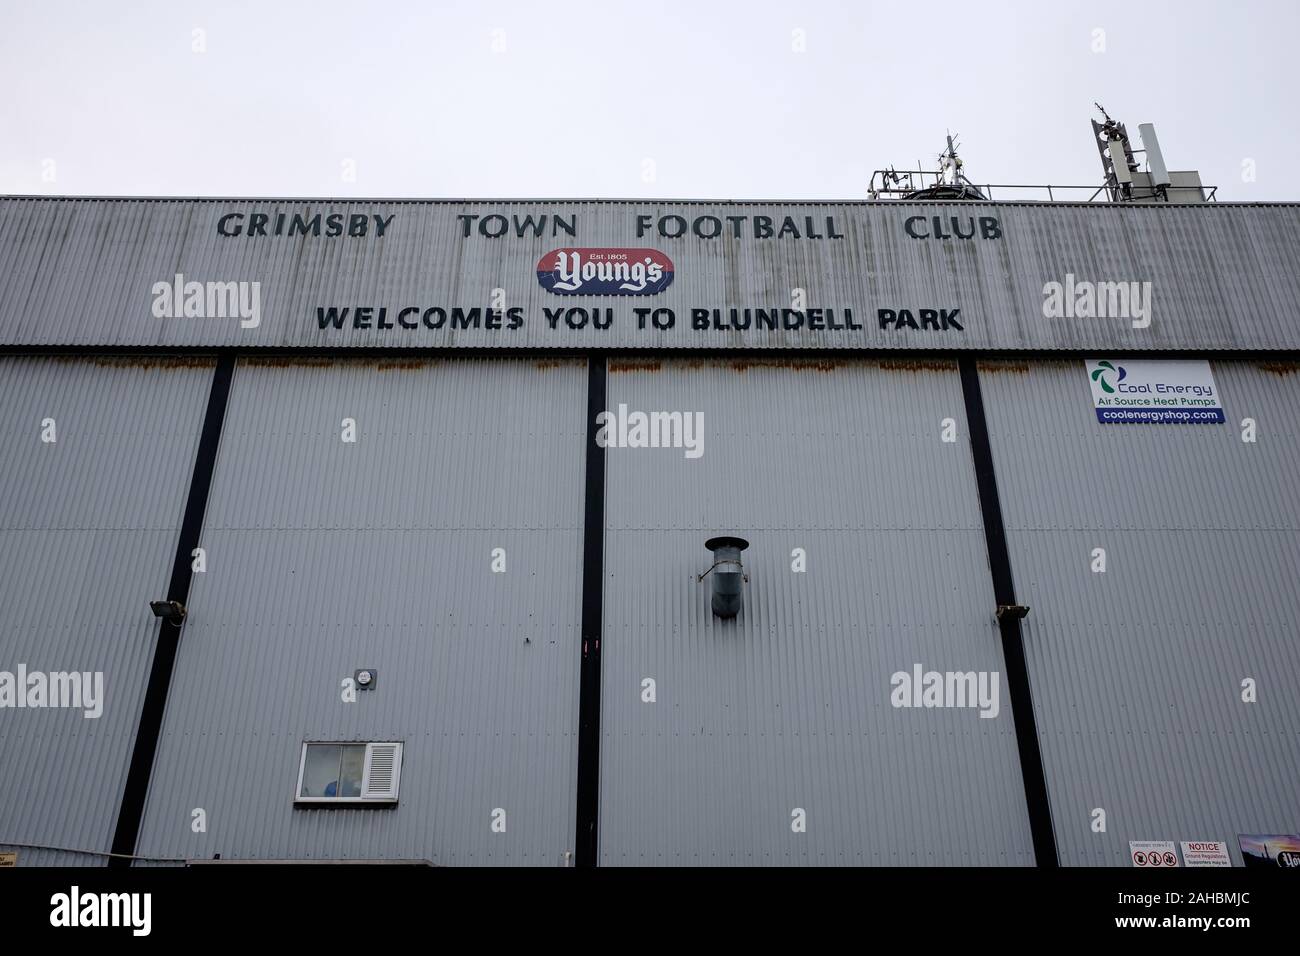 Blundell Park, home of Grimsby Town Football Club Stock Photo